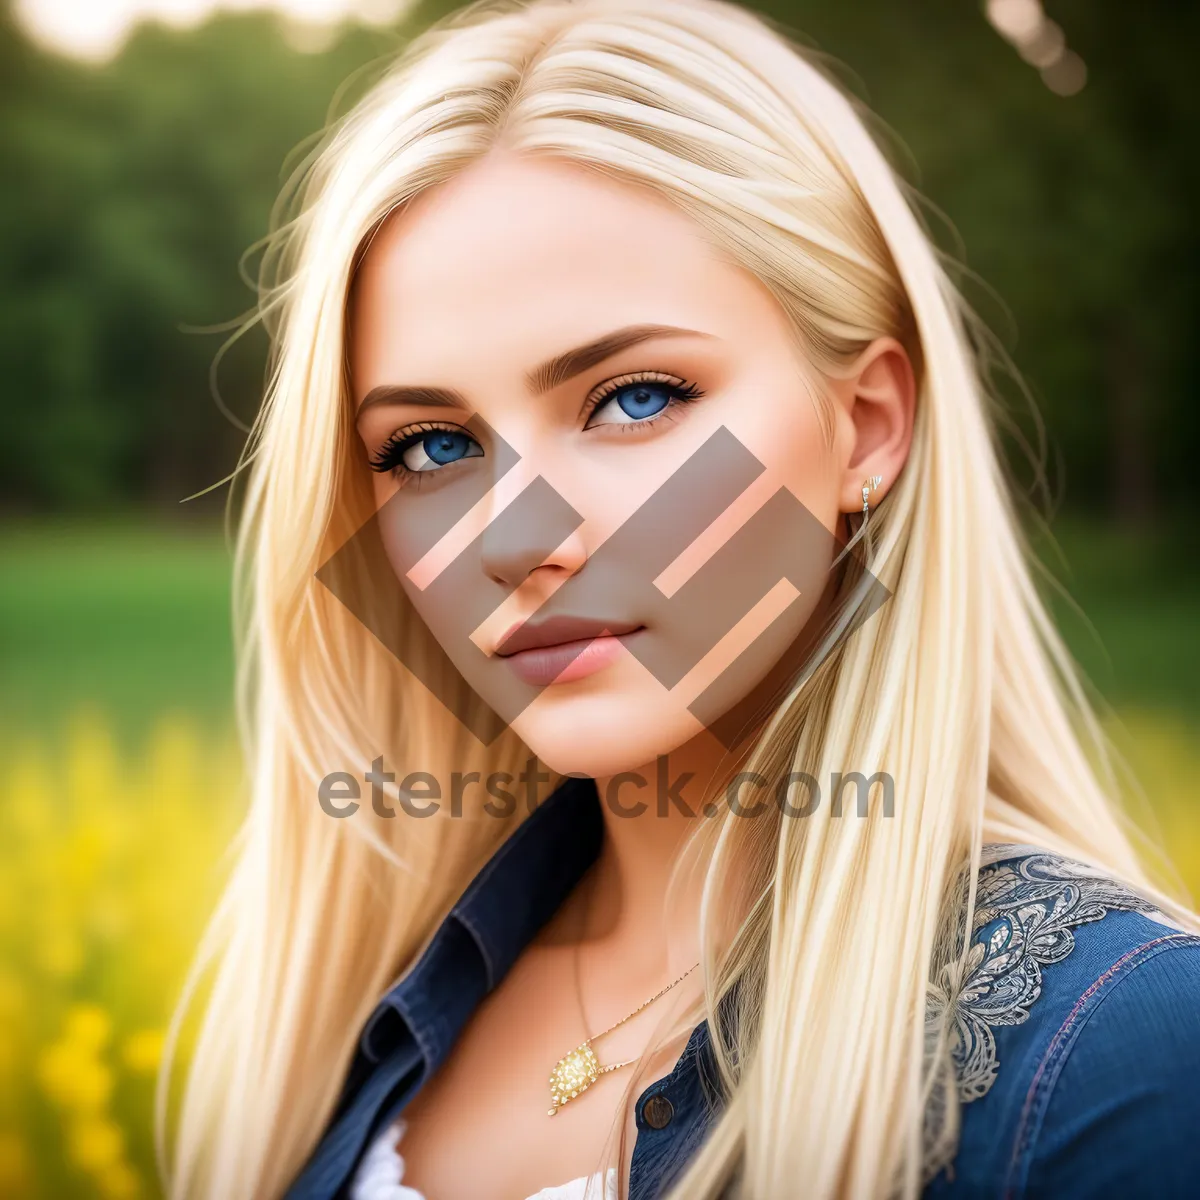 Picture of Smiling Blond Woman with Dandelion in Outdoor Portraits